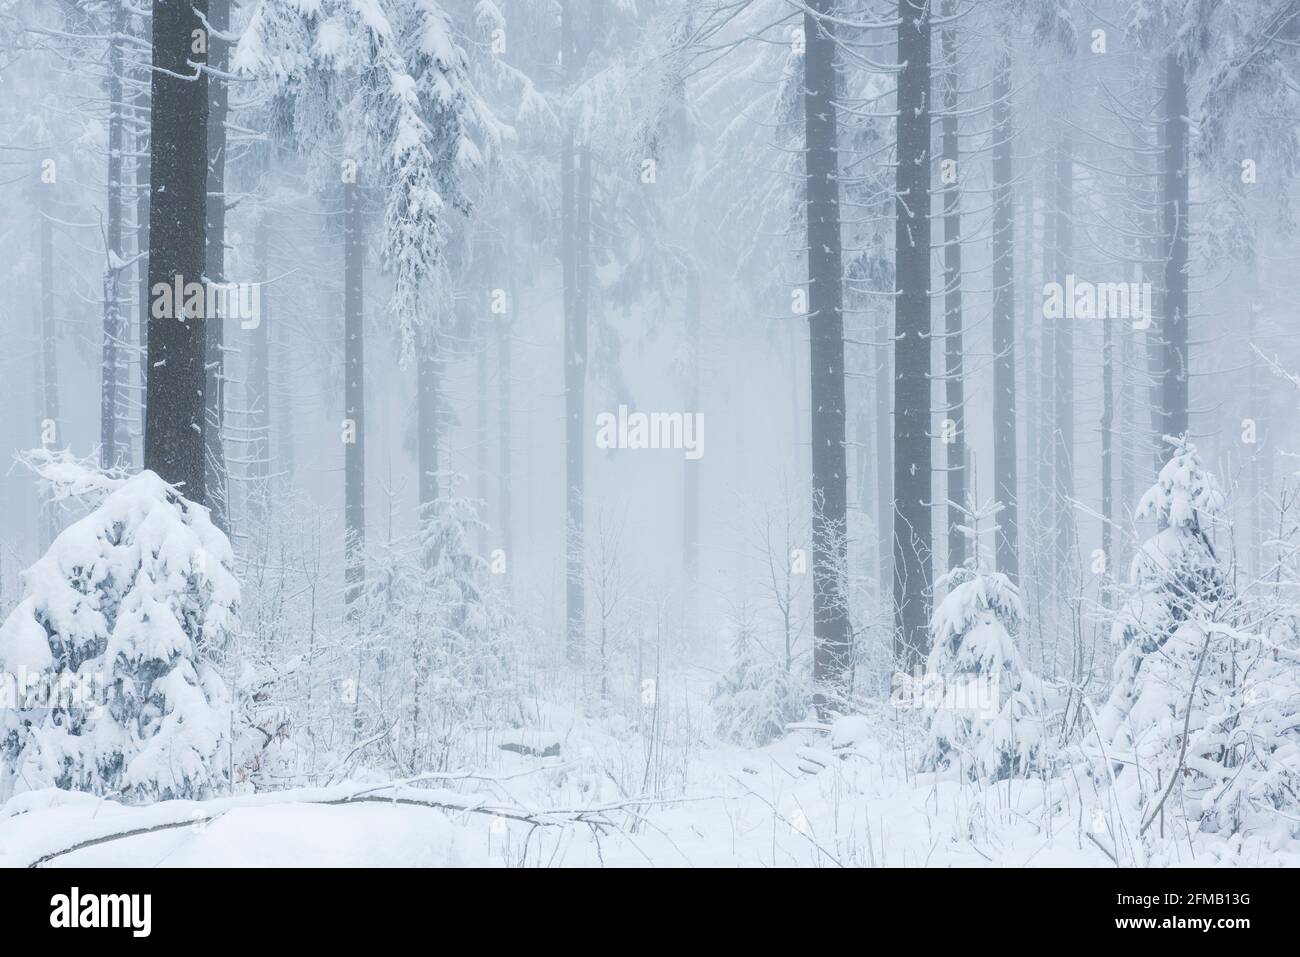 Germany, Bavaria, Franconia, Upper Franconia, Fichtelgebirge, Großer Waldstein, near-natural forest in winter with snow, hoar frost, fog Stock Photo